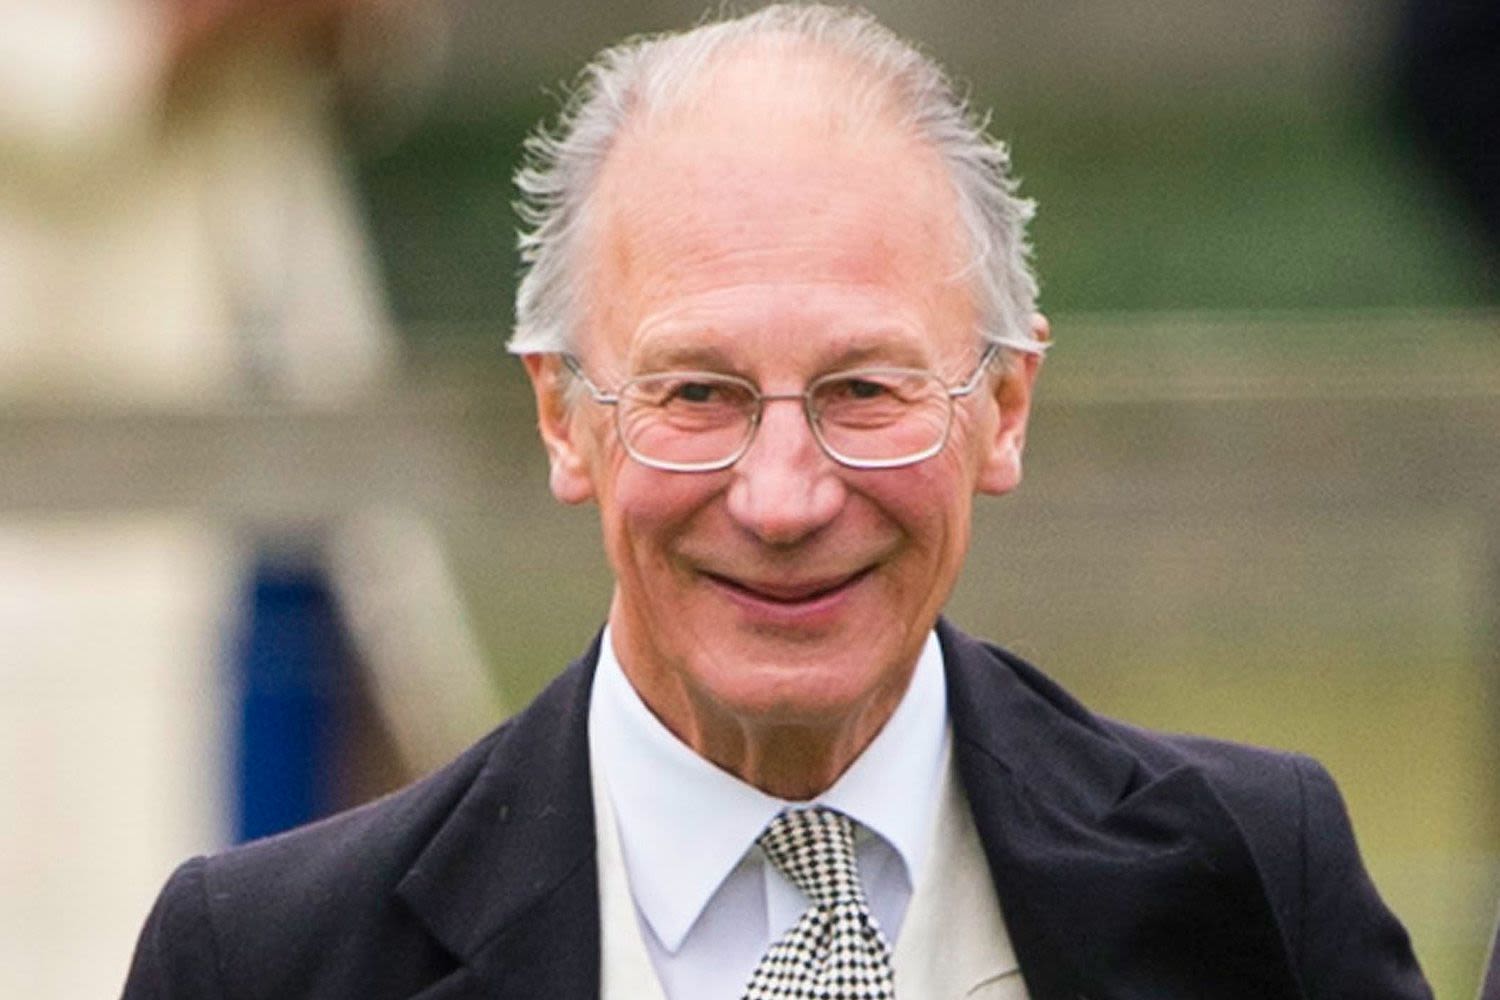 Prince William and Prince Harry’s Uncle Robert Fellowes, Brother-in-Law of Princess Diana, Dies at 82